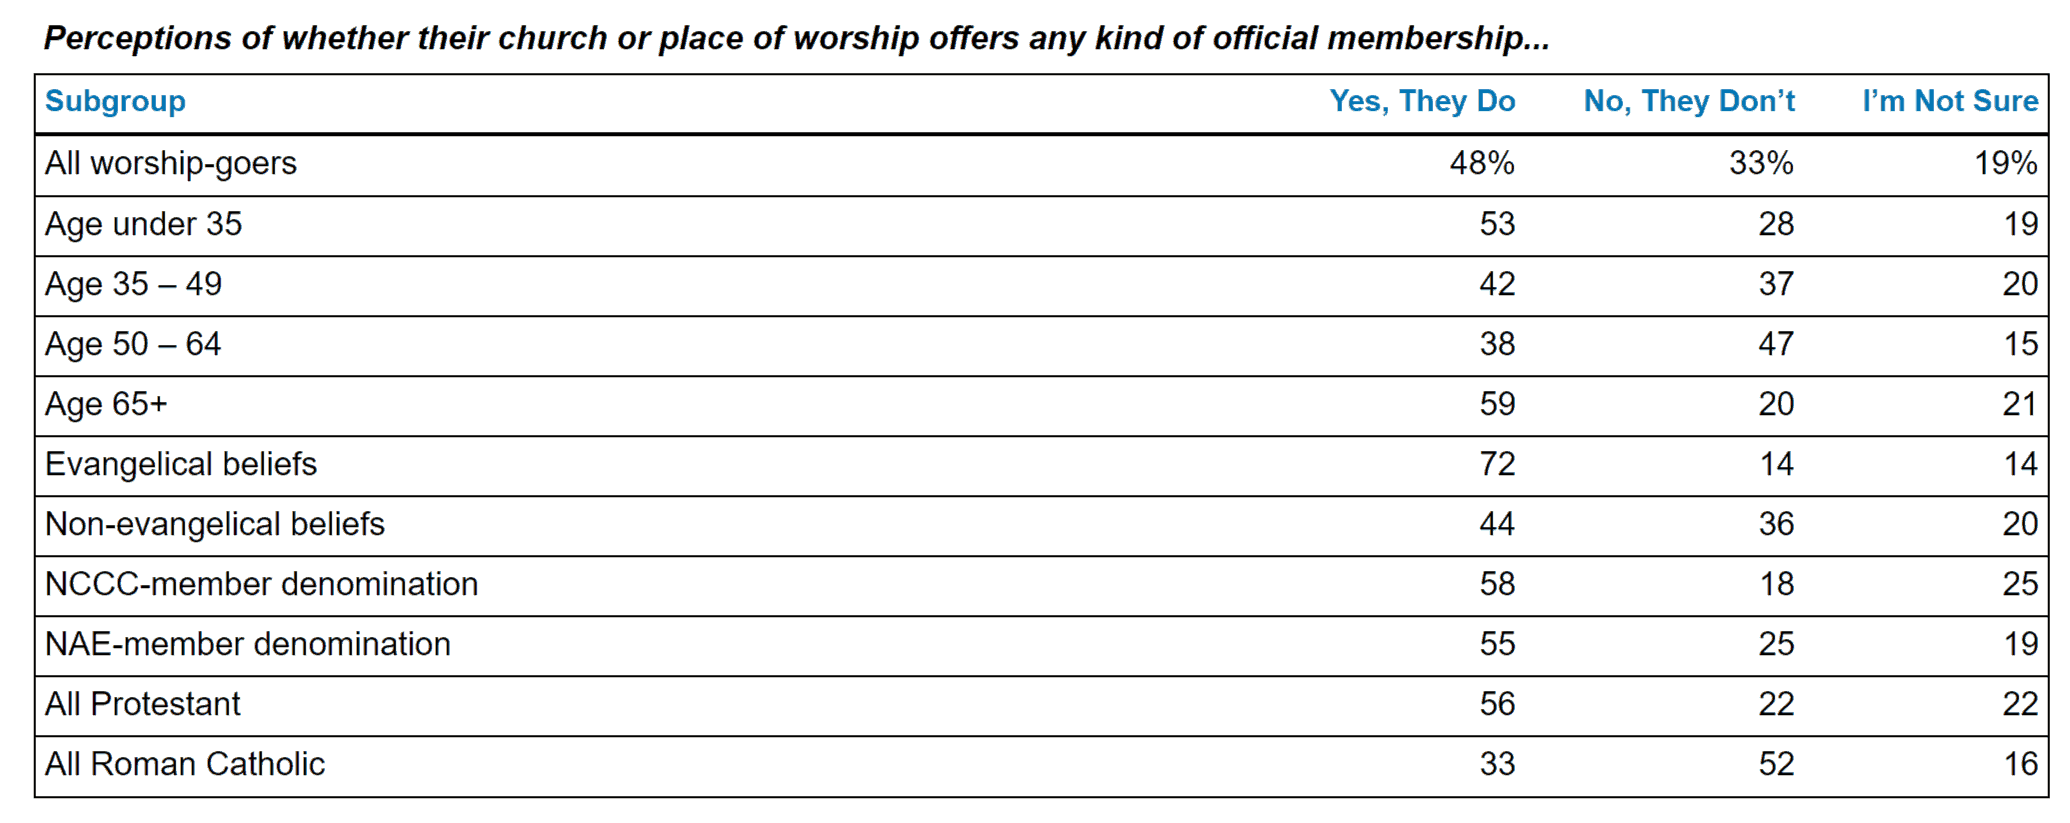 Are Americans official members of the place of worship they attend?